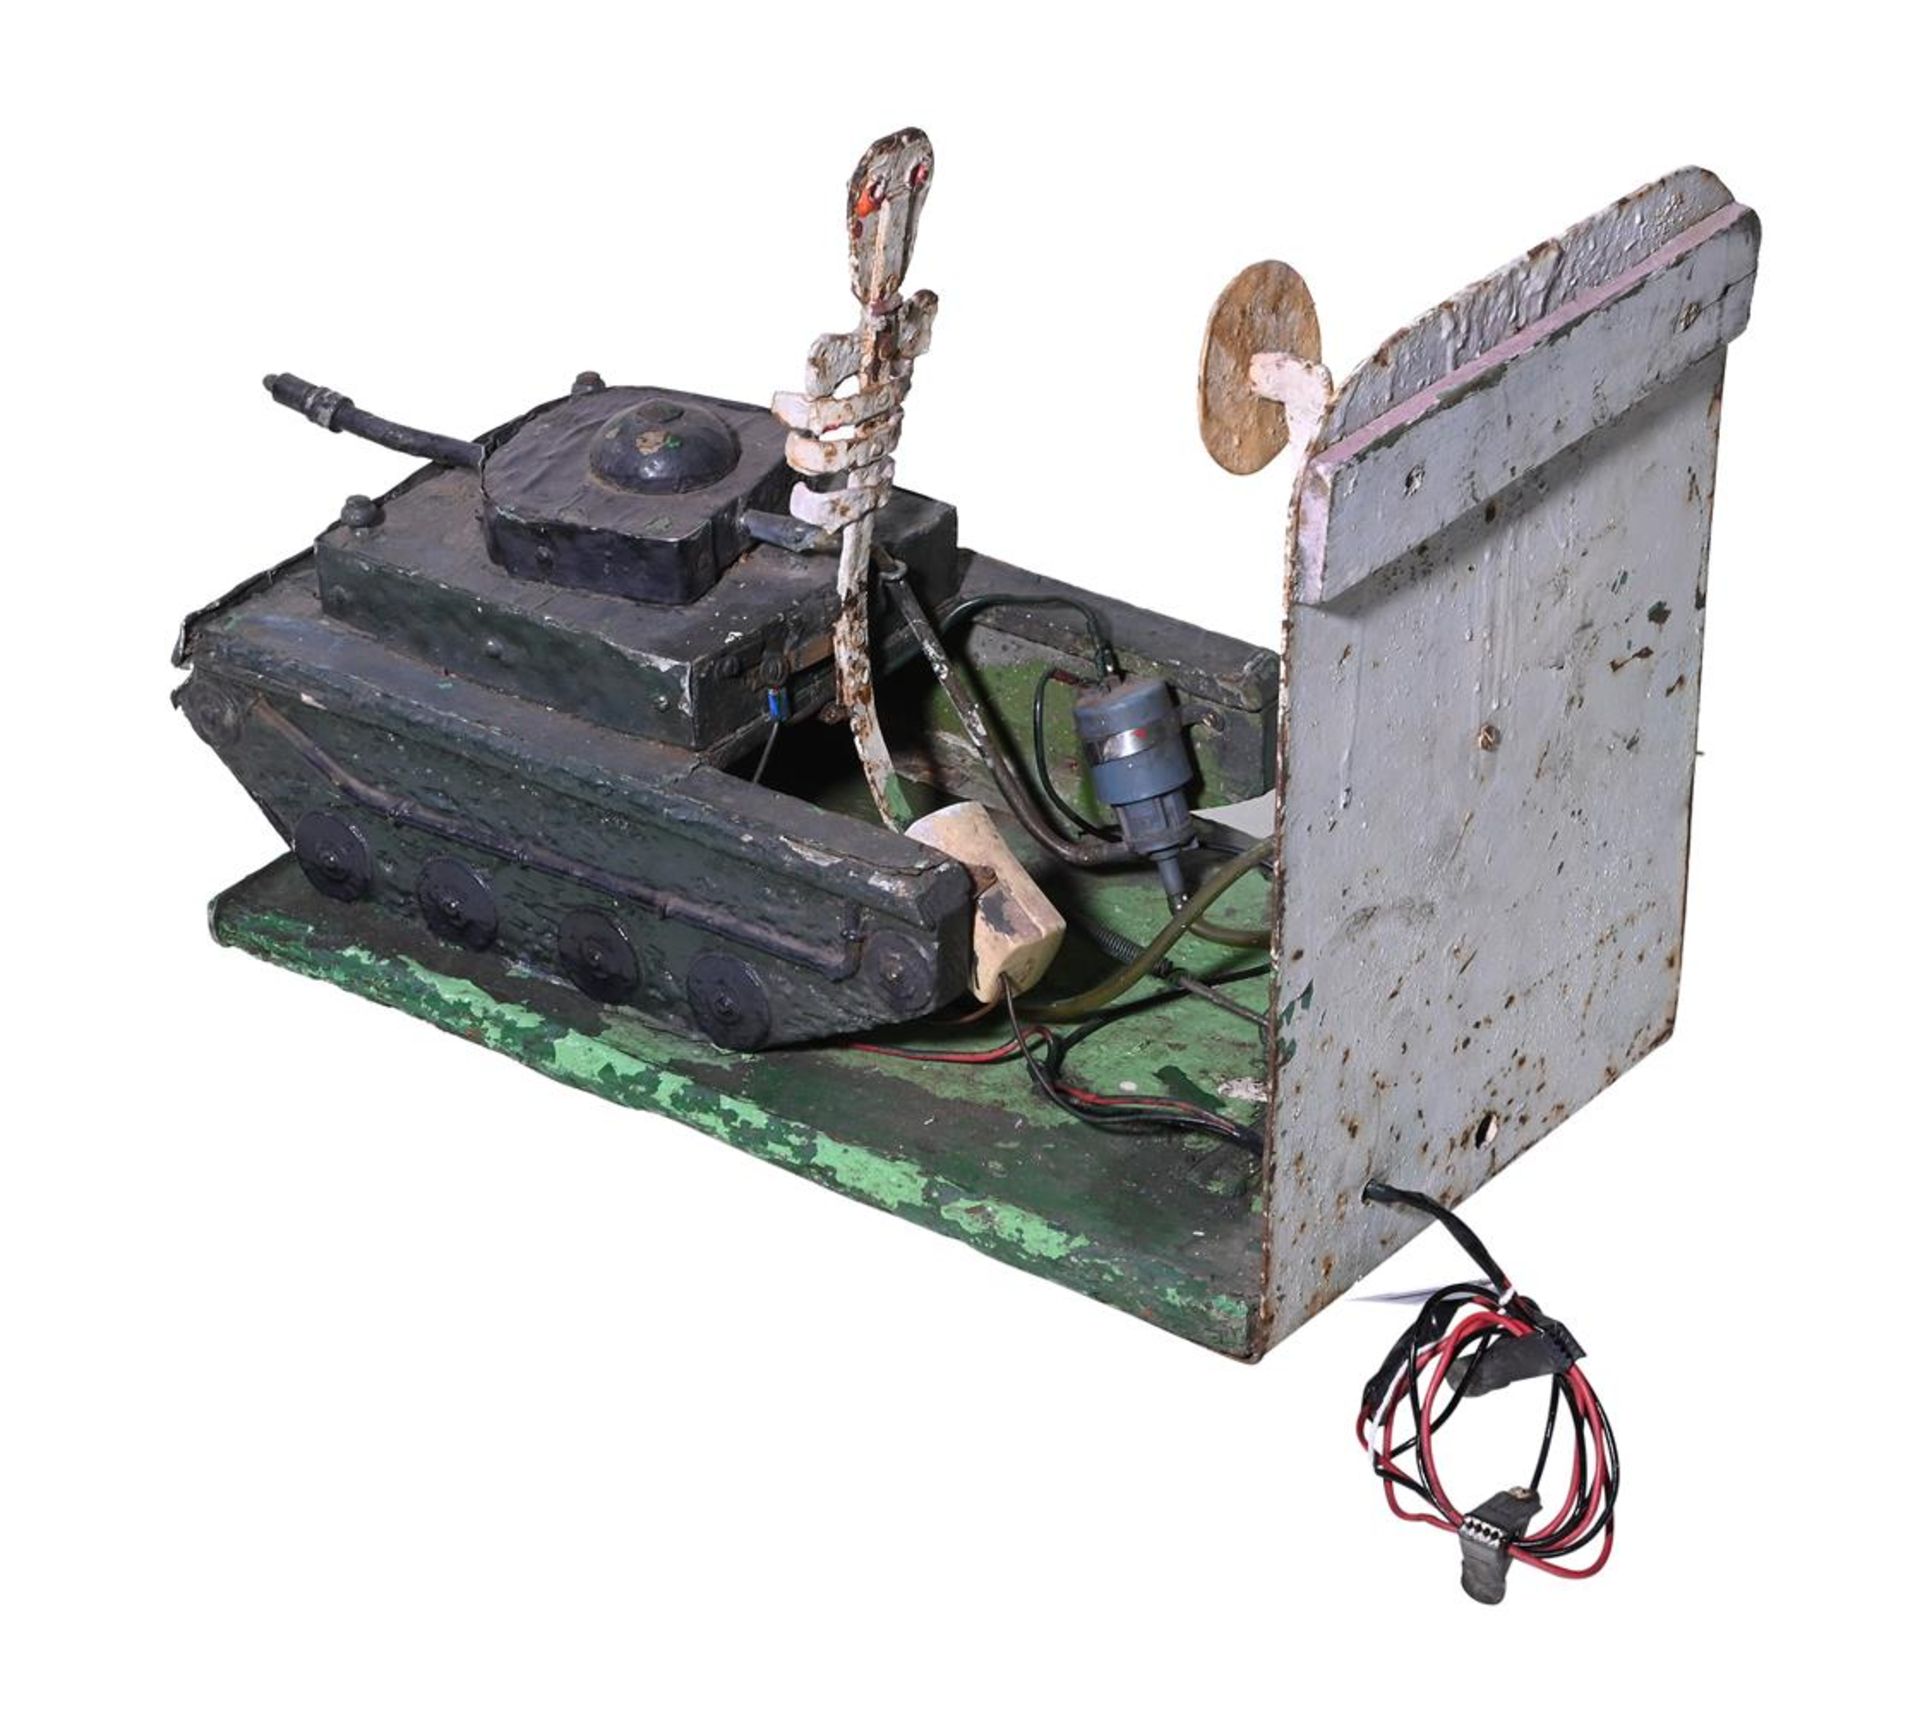 A SCRATCH-BUILT PAINTED METAL AND WOOD FAIRGROUND 'SKELETON TANK' SPRAY TARGET - Image 2 of 2